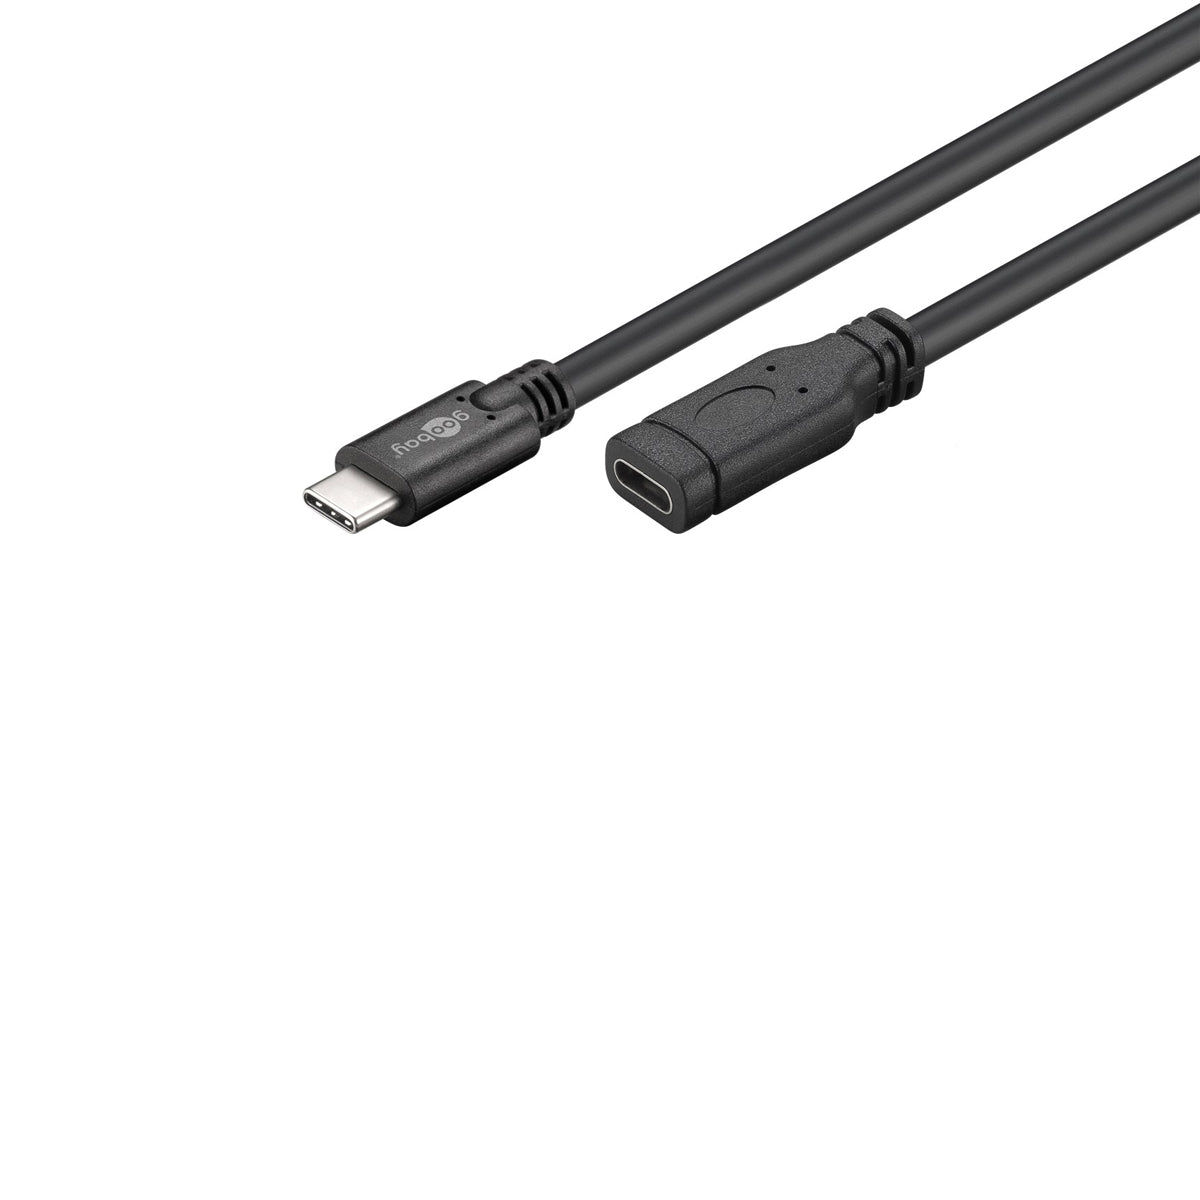 Goobay USB Type-C 3.1 Extension 1M Cable.